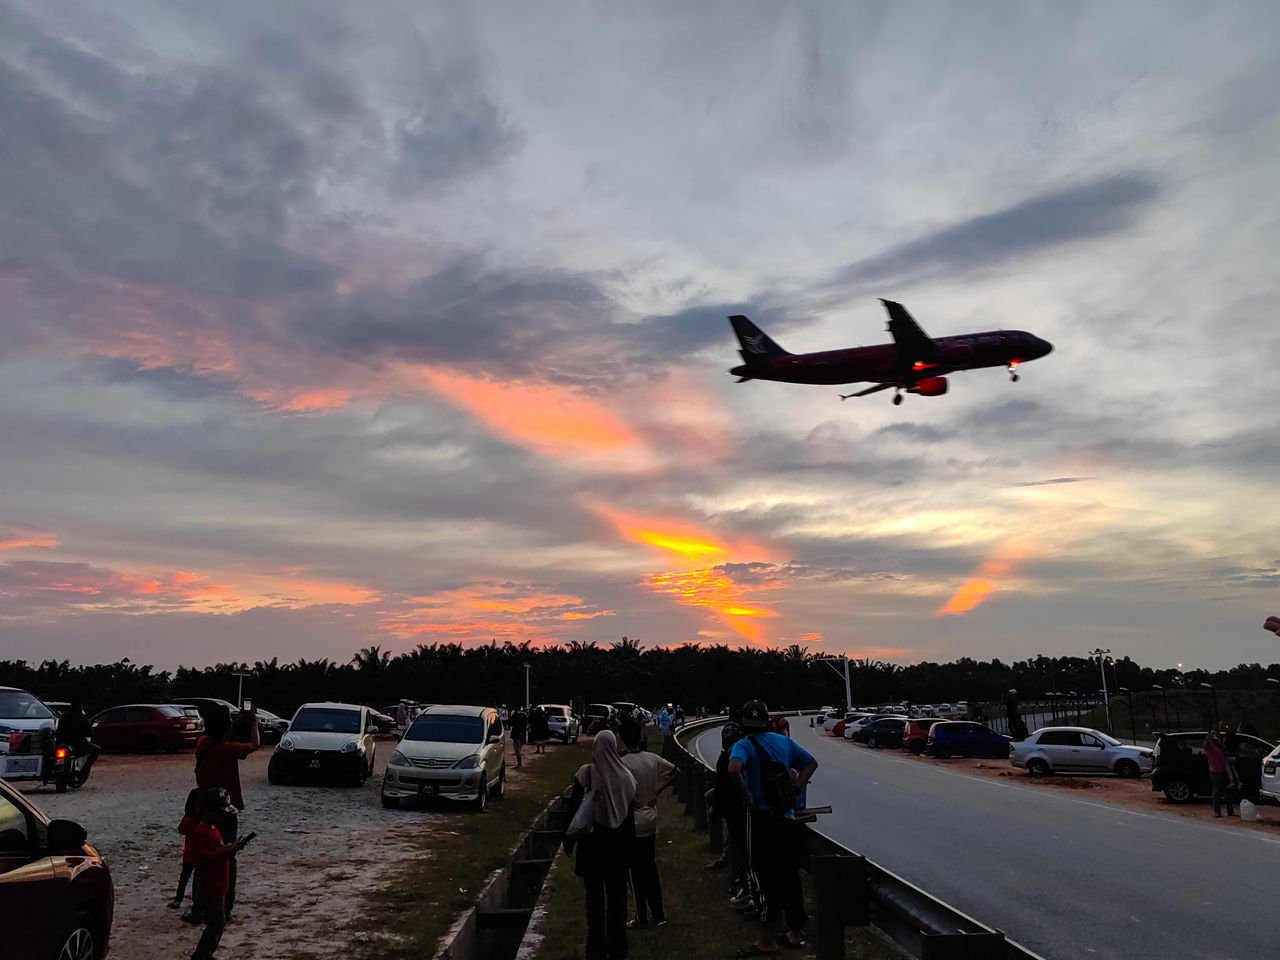 transportation, mode of transportation, sky, sunset, air vehicle, cloud, airplane, vehicle, flying, nature, car, motor vehicle, travel, aircraft, dusk, motion, aviation, evening, airport, on the move, orange color, architecture, dramatic sky, land vehicle, outdoors, city, sea, airport runway, silhouette, road